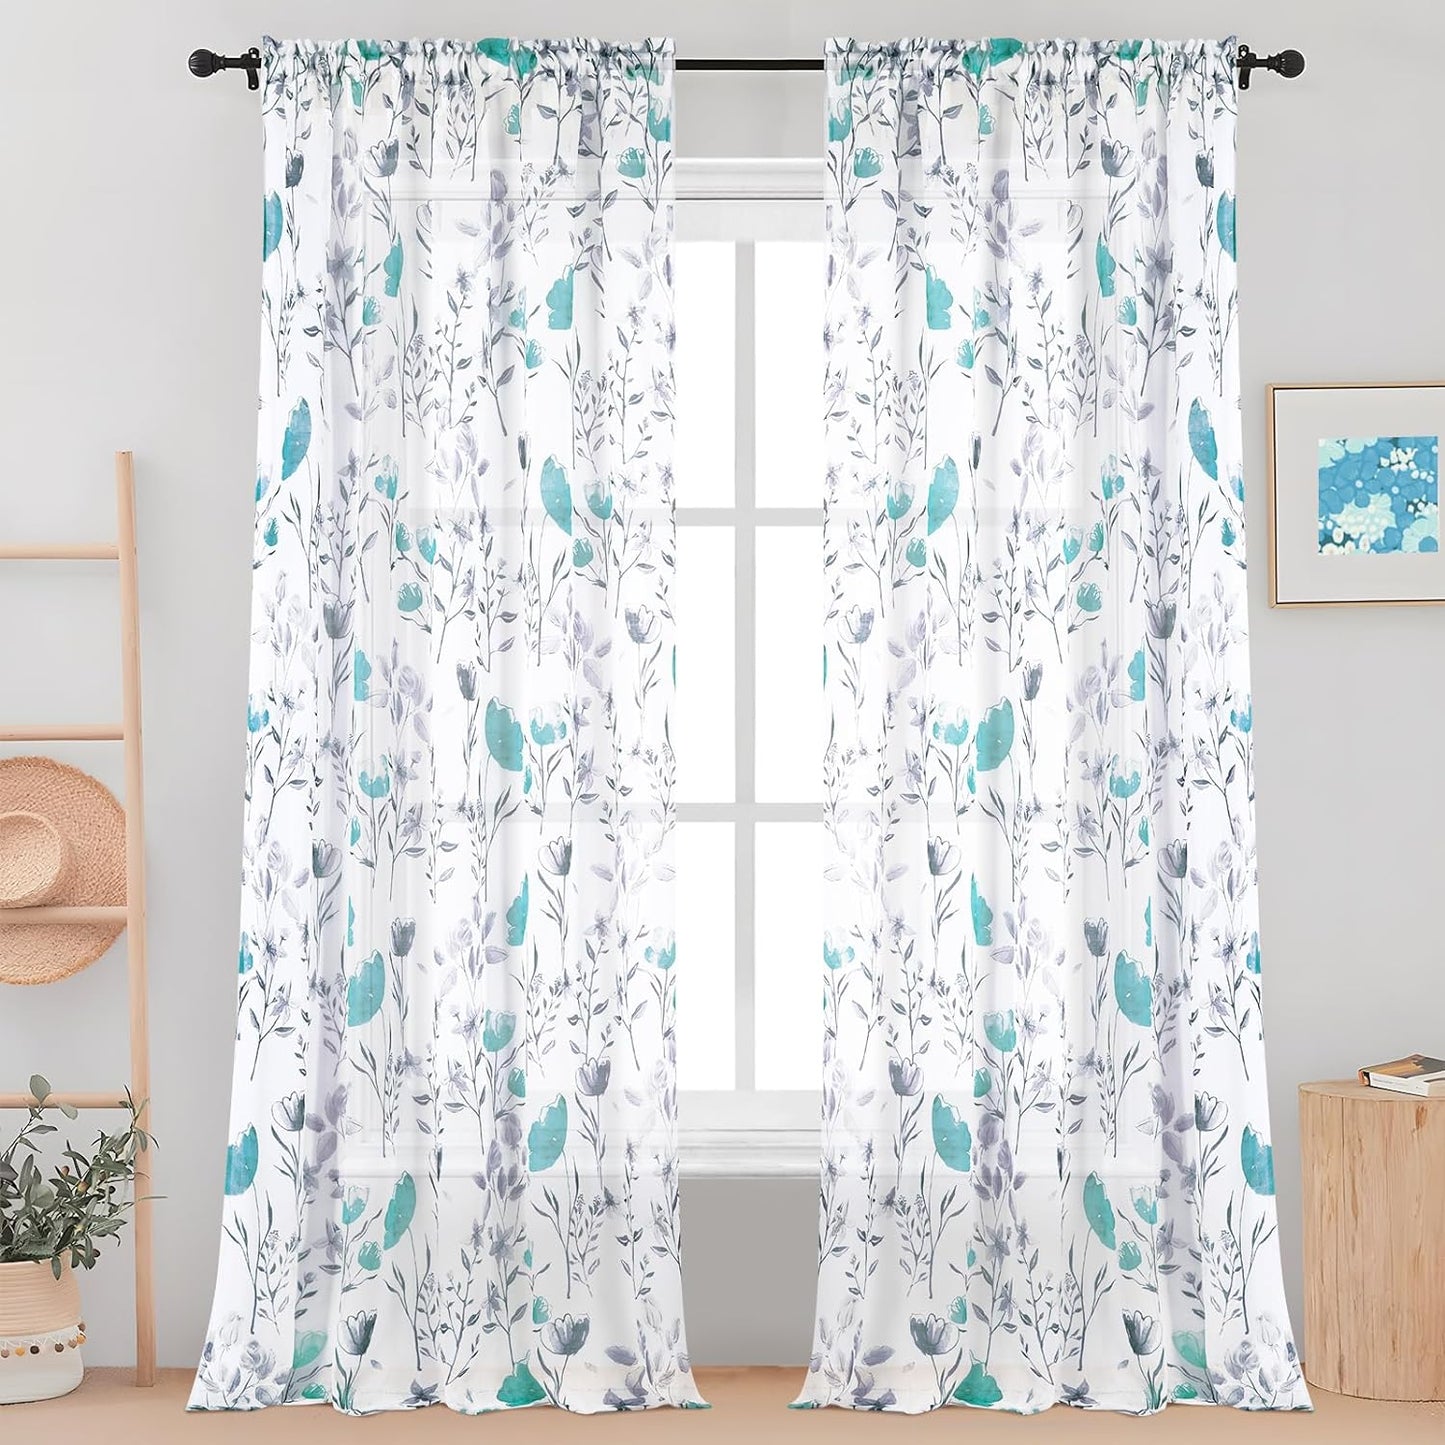 Likiyol Floral Kithchen Curtains 36 Inch Watercolor Flower Leaves Tier Curtains, Yellow and Gray Floral Cafe Curtains, Rod Pocket Small Window Curtain for Cafe Bathroom Bedroom Drapes  Likiyol Teal Sheer 84"L X 52"W 